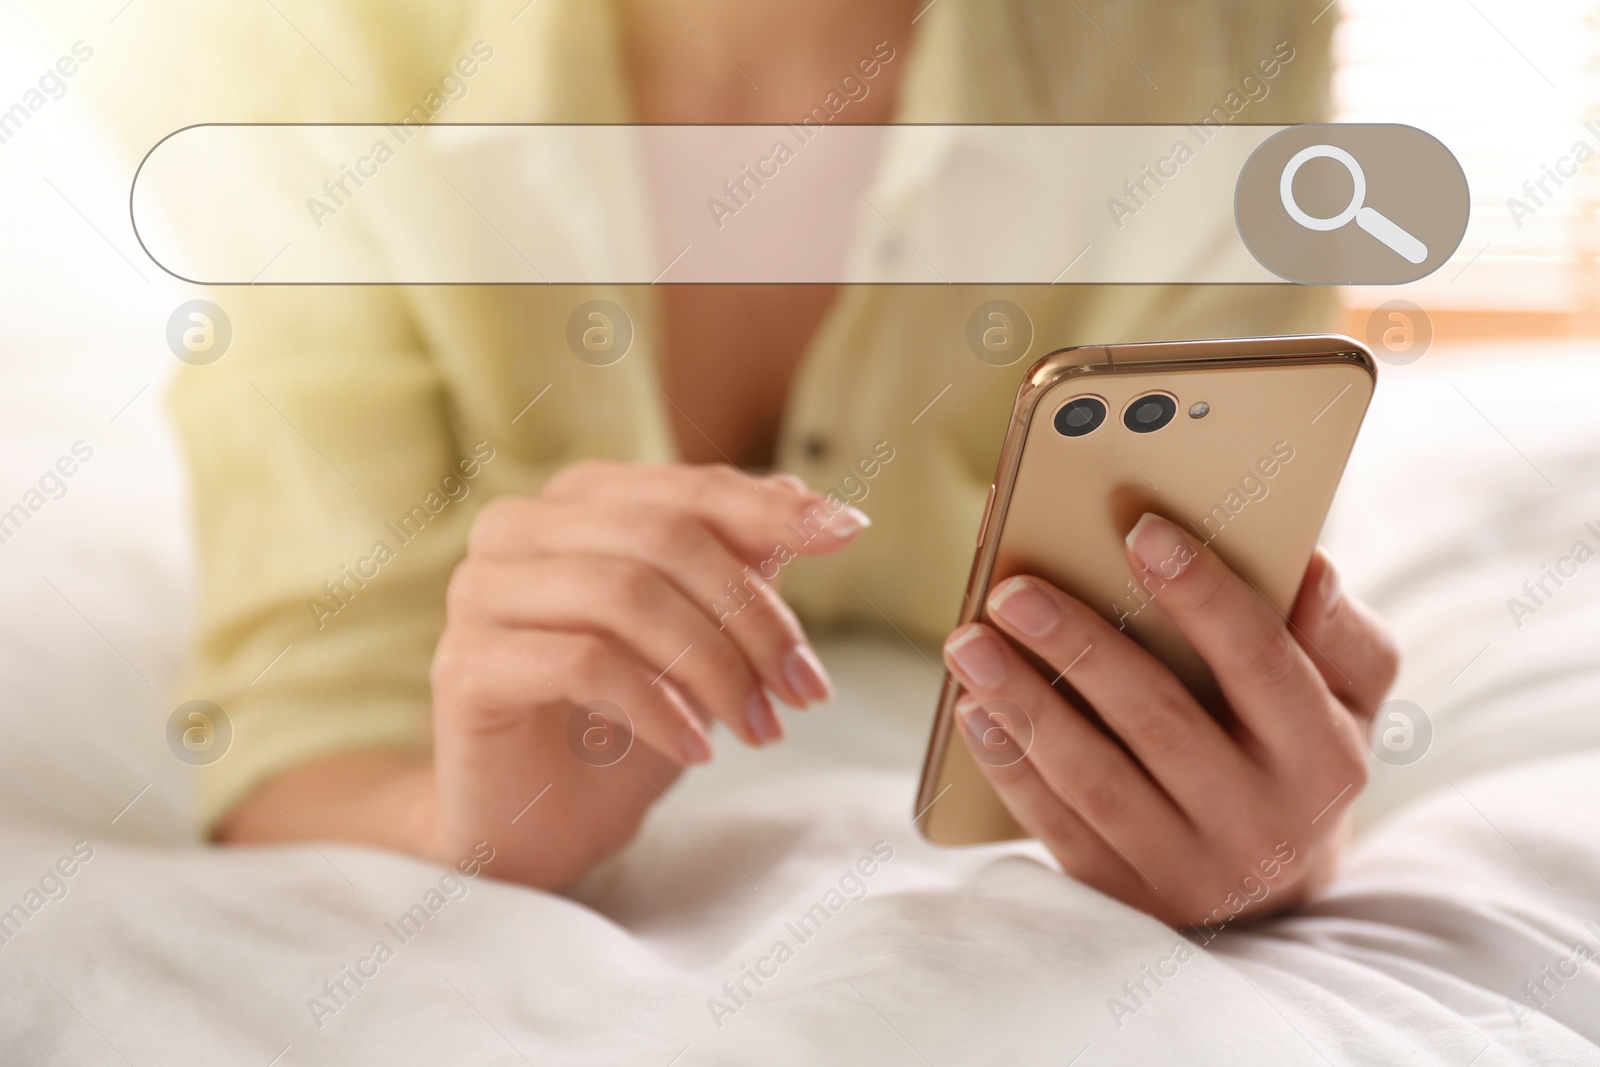 Image of Search bar of internet browser and woman using smartphone on bed at home, closeup